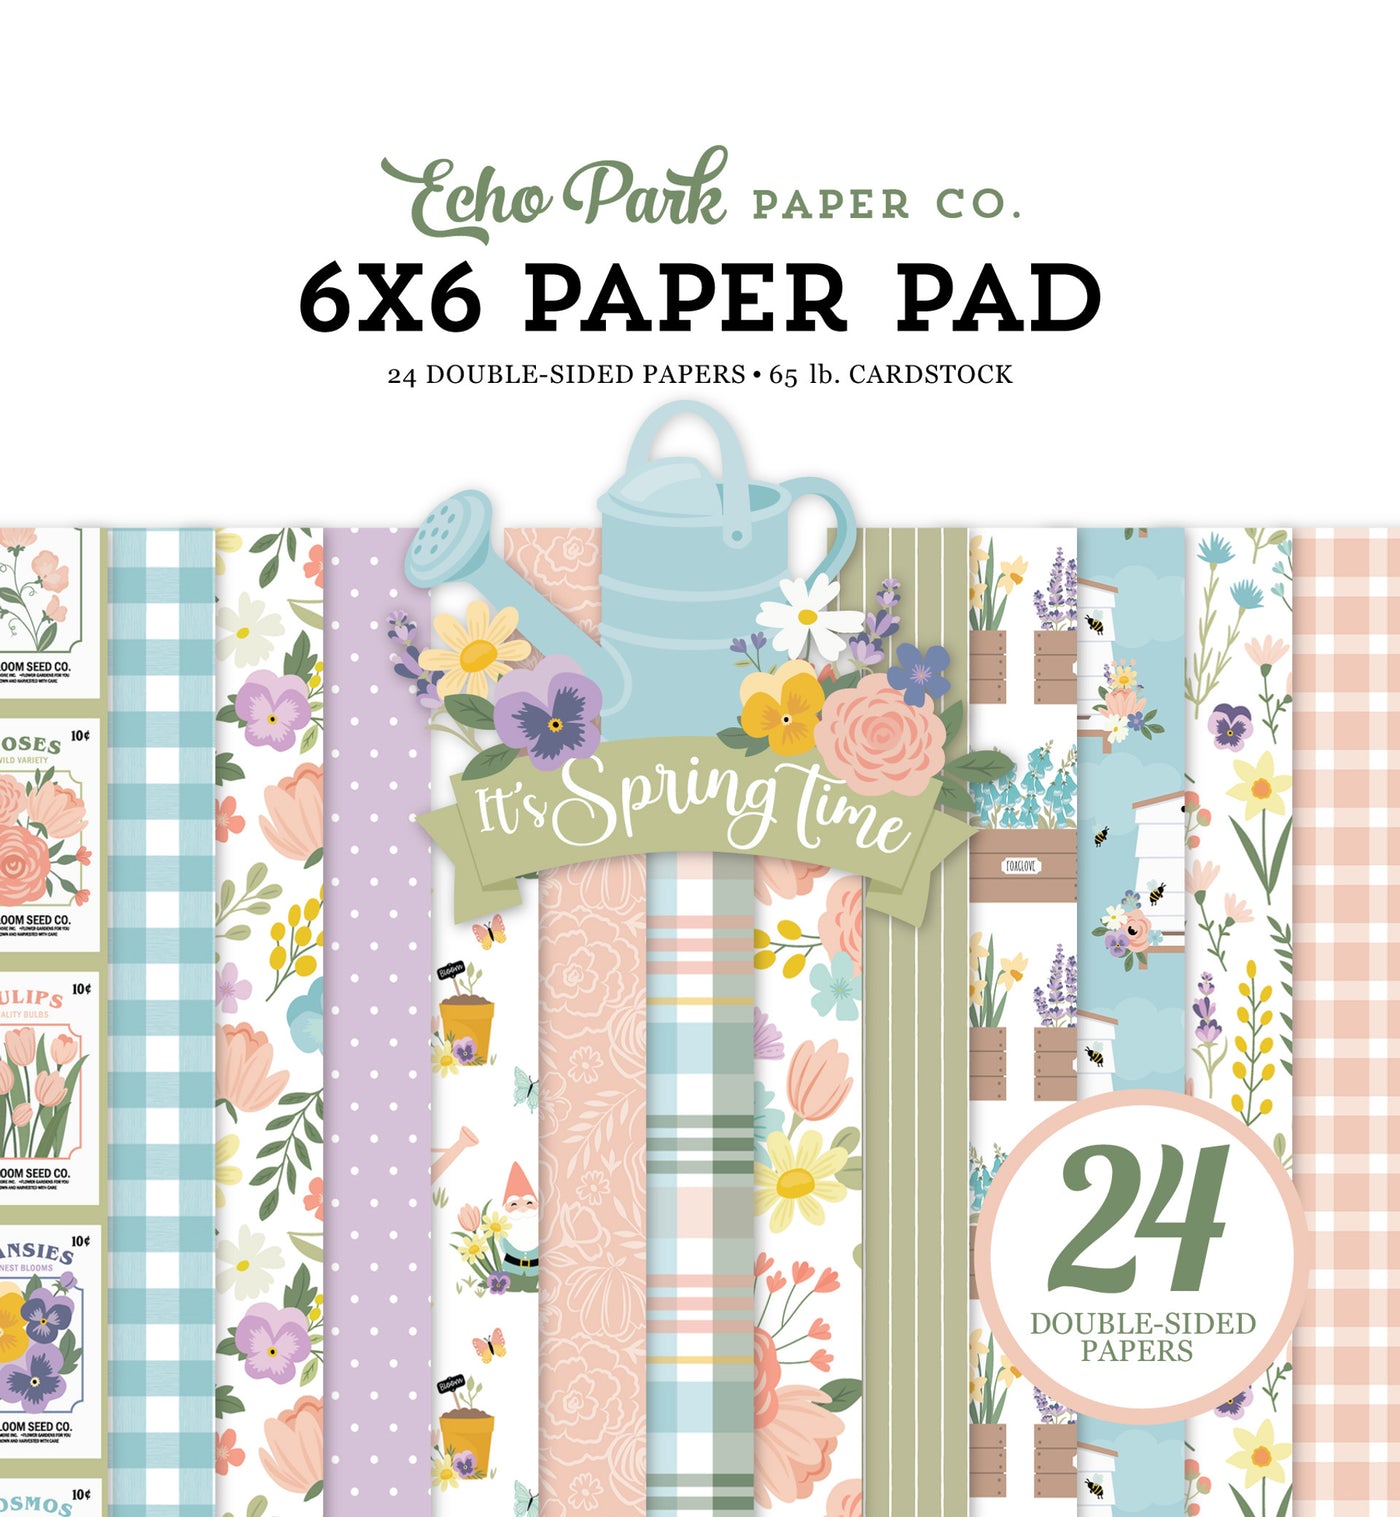 Spring pastel colors in floral and geometric patterns. Twenty-four double-sided 6x6 pages for springtime cards and paper crafting projects. By Echo Park Paper Co.